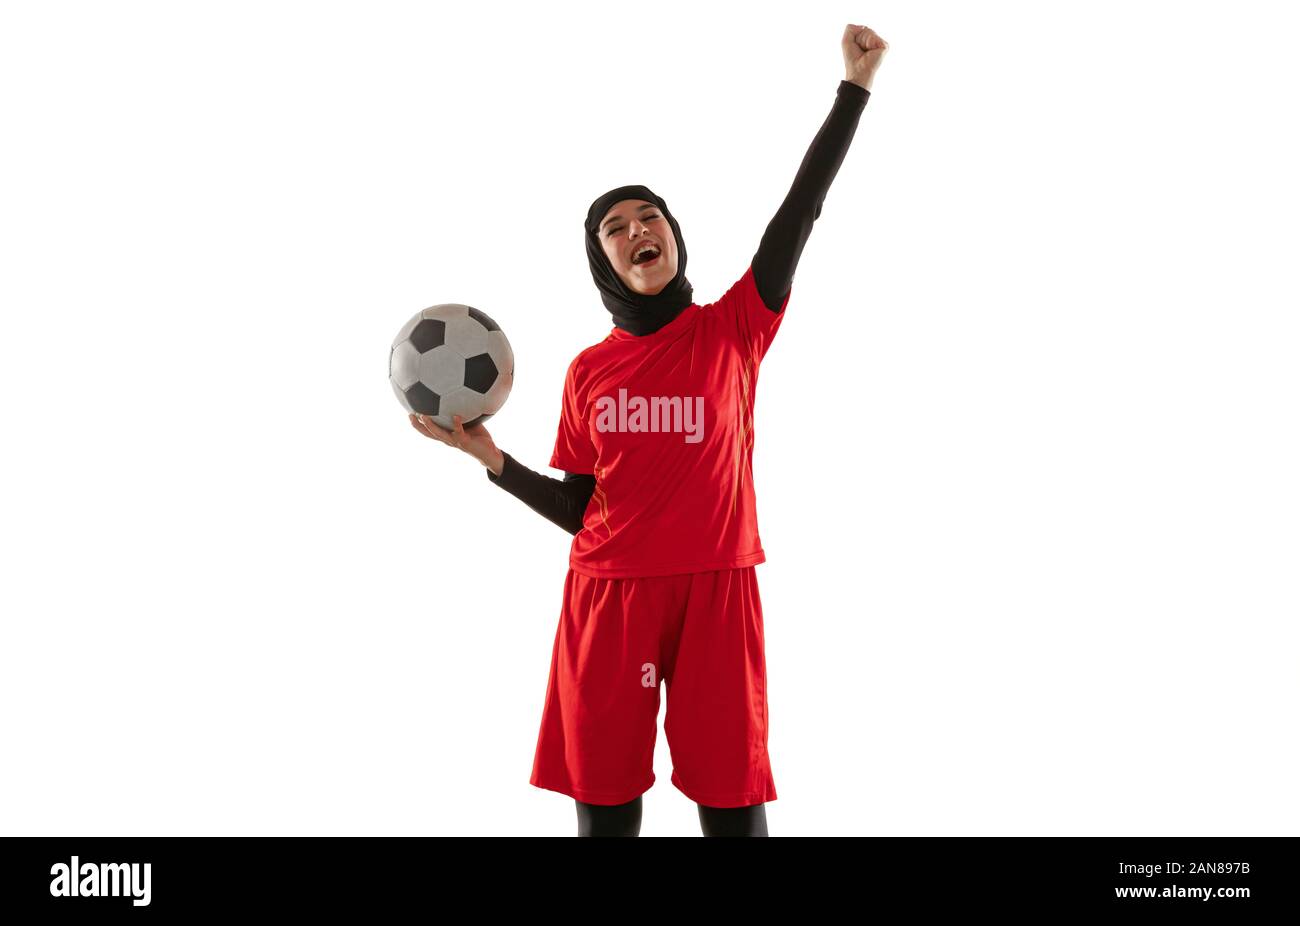 Emotions. Arabian female soccer or football player on white studio background. Young woman celebrating goal or match winning, catched in motion, action. Concept of sport, hobby, healthy lifestyle. Stock Photo